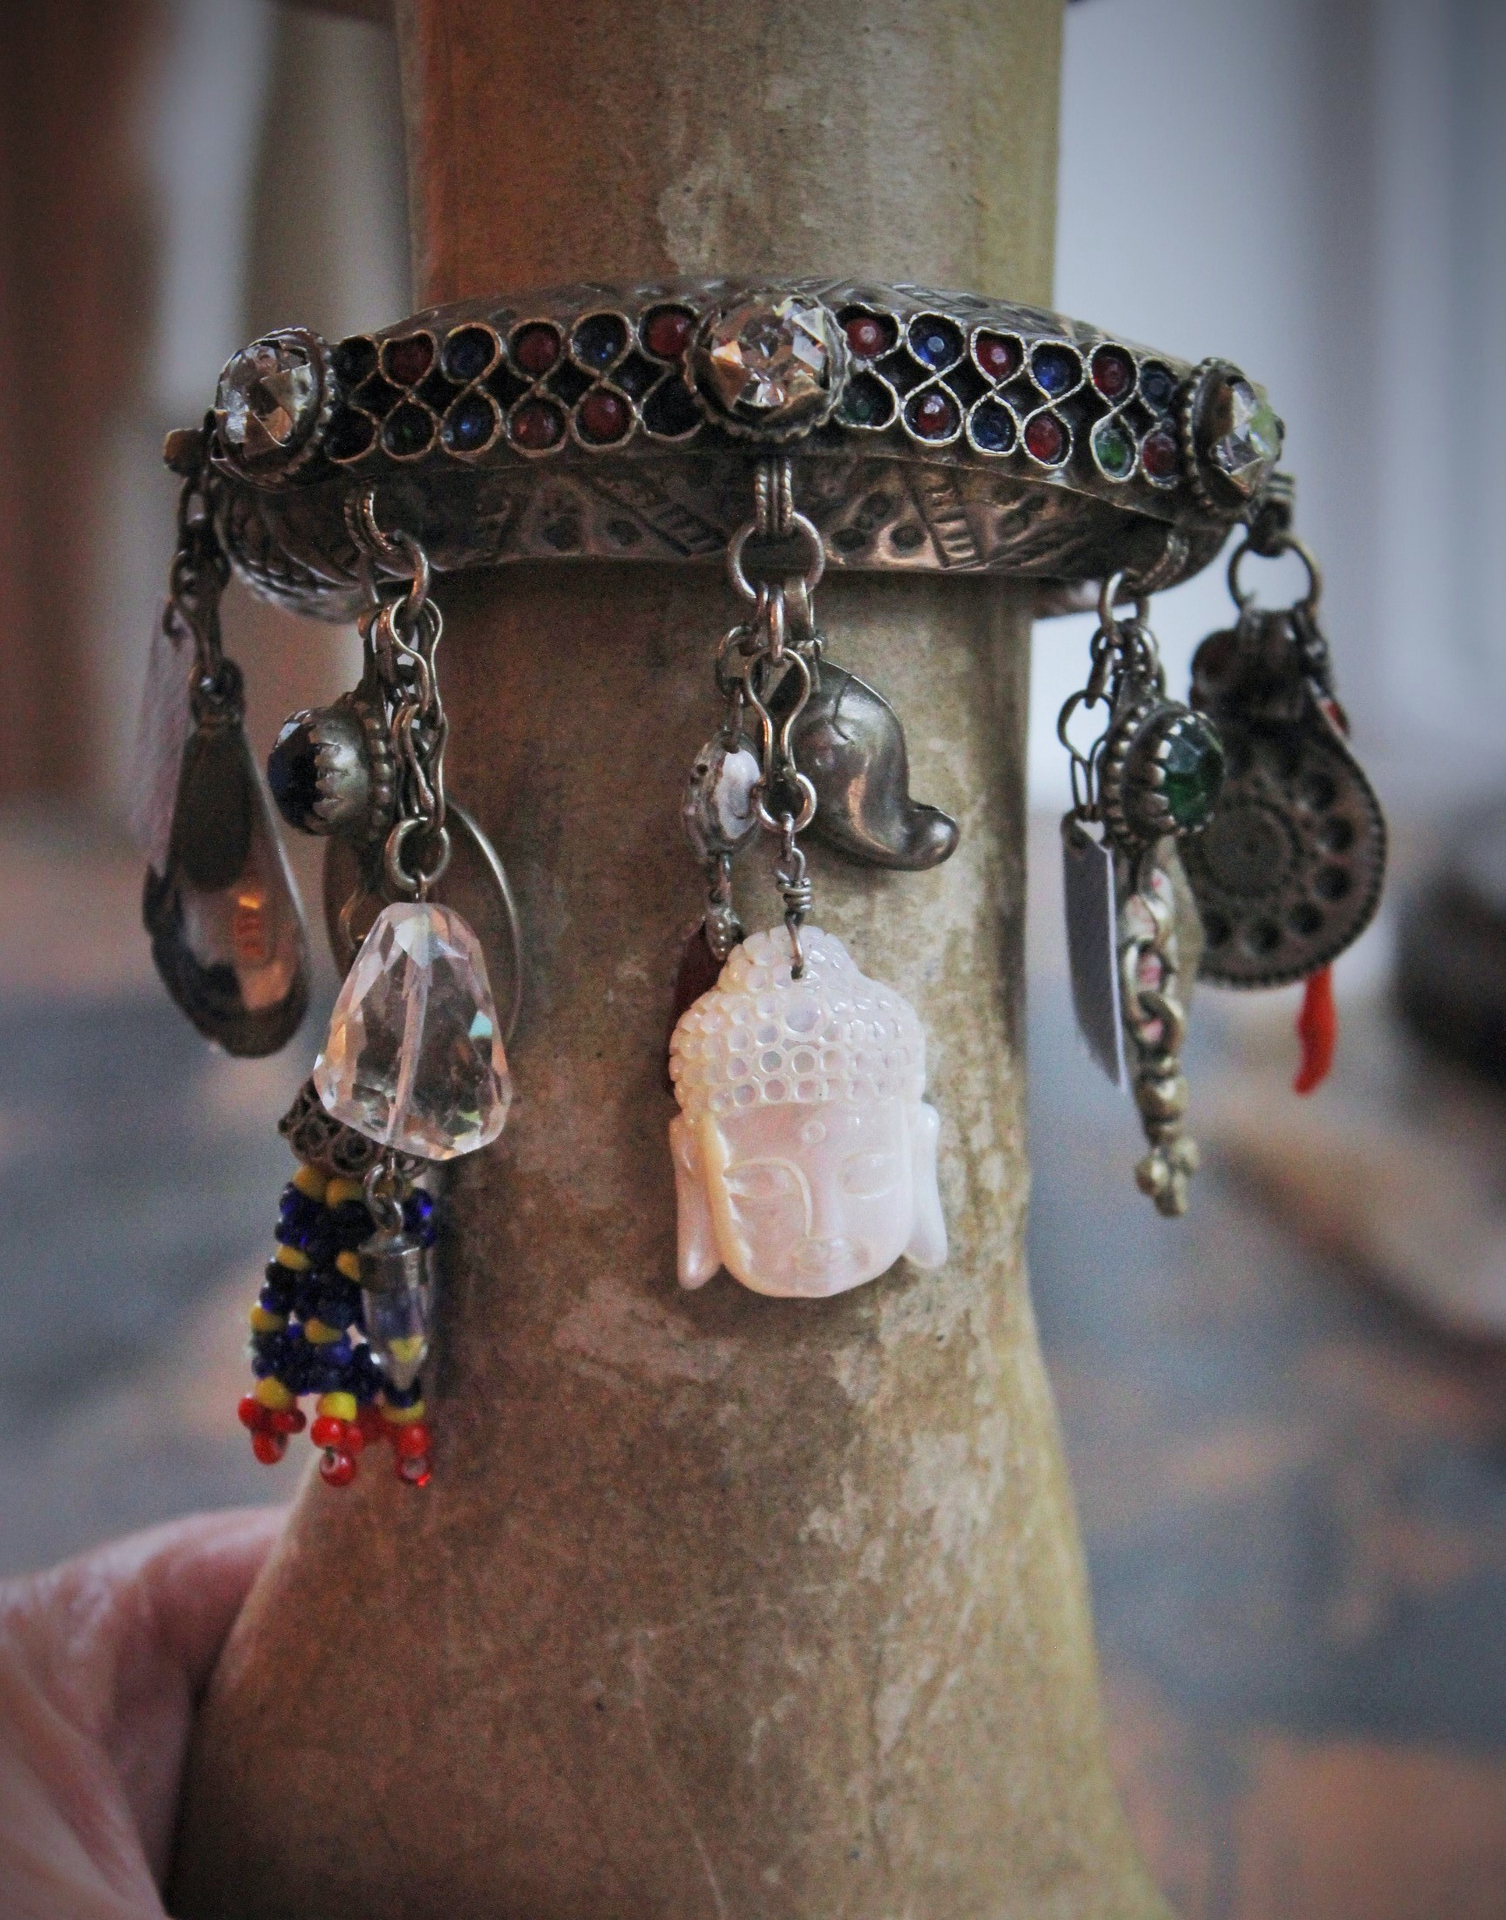 Unique Antique Gypsy Nomad Cuff Bracelet w/Inset Faceted Crystal Stones,Faceted Rock Quartz,2 Miniature Tarot Cards,Red Coral Stick,Found Shells +More!